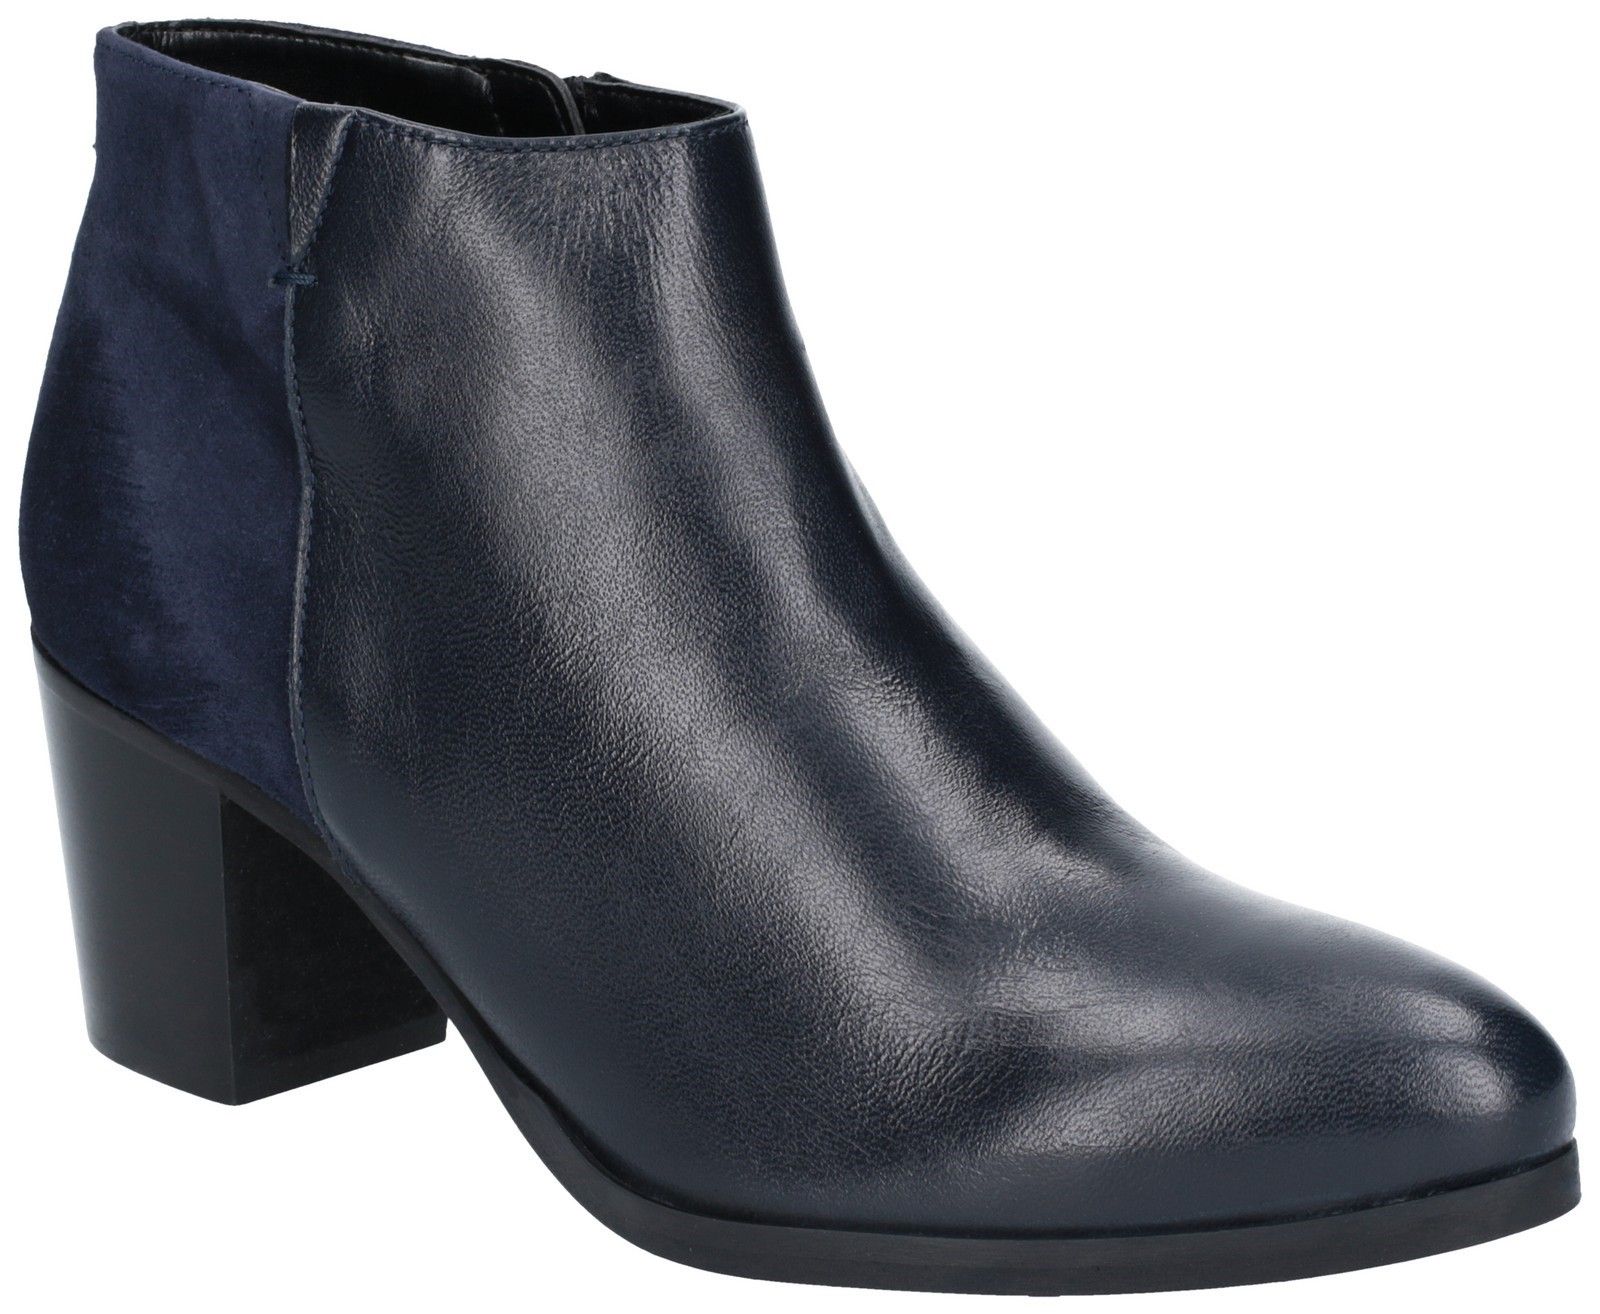 Riva brings in a twist with this eye-catching evening boot with warm lining.  Half suede and smooth leather panels gives an elegant contrast to a traditional ankle boot. Crafted with a luxury leather upper. 
Flexible and supple smooth leather vamp. 
Brushed suede back. 
Full side zip opening. 
Subtle elasticated v-neck side panel for additional fitting.